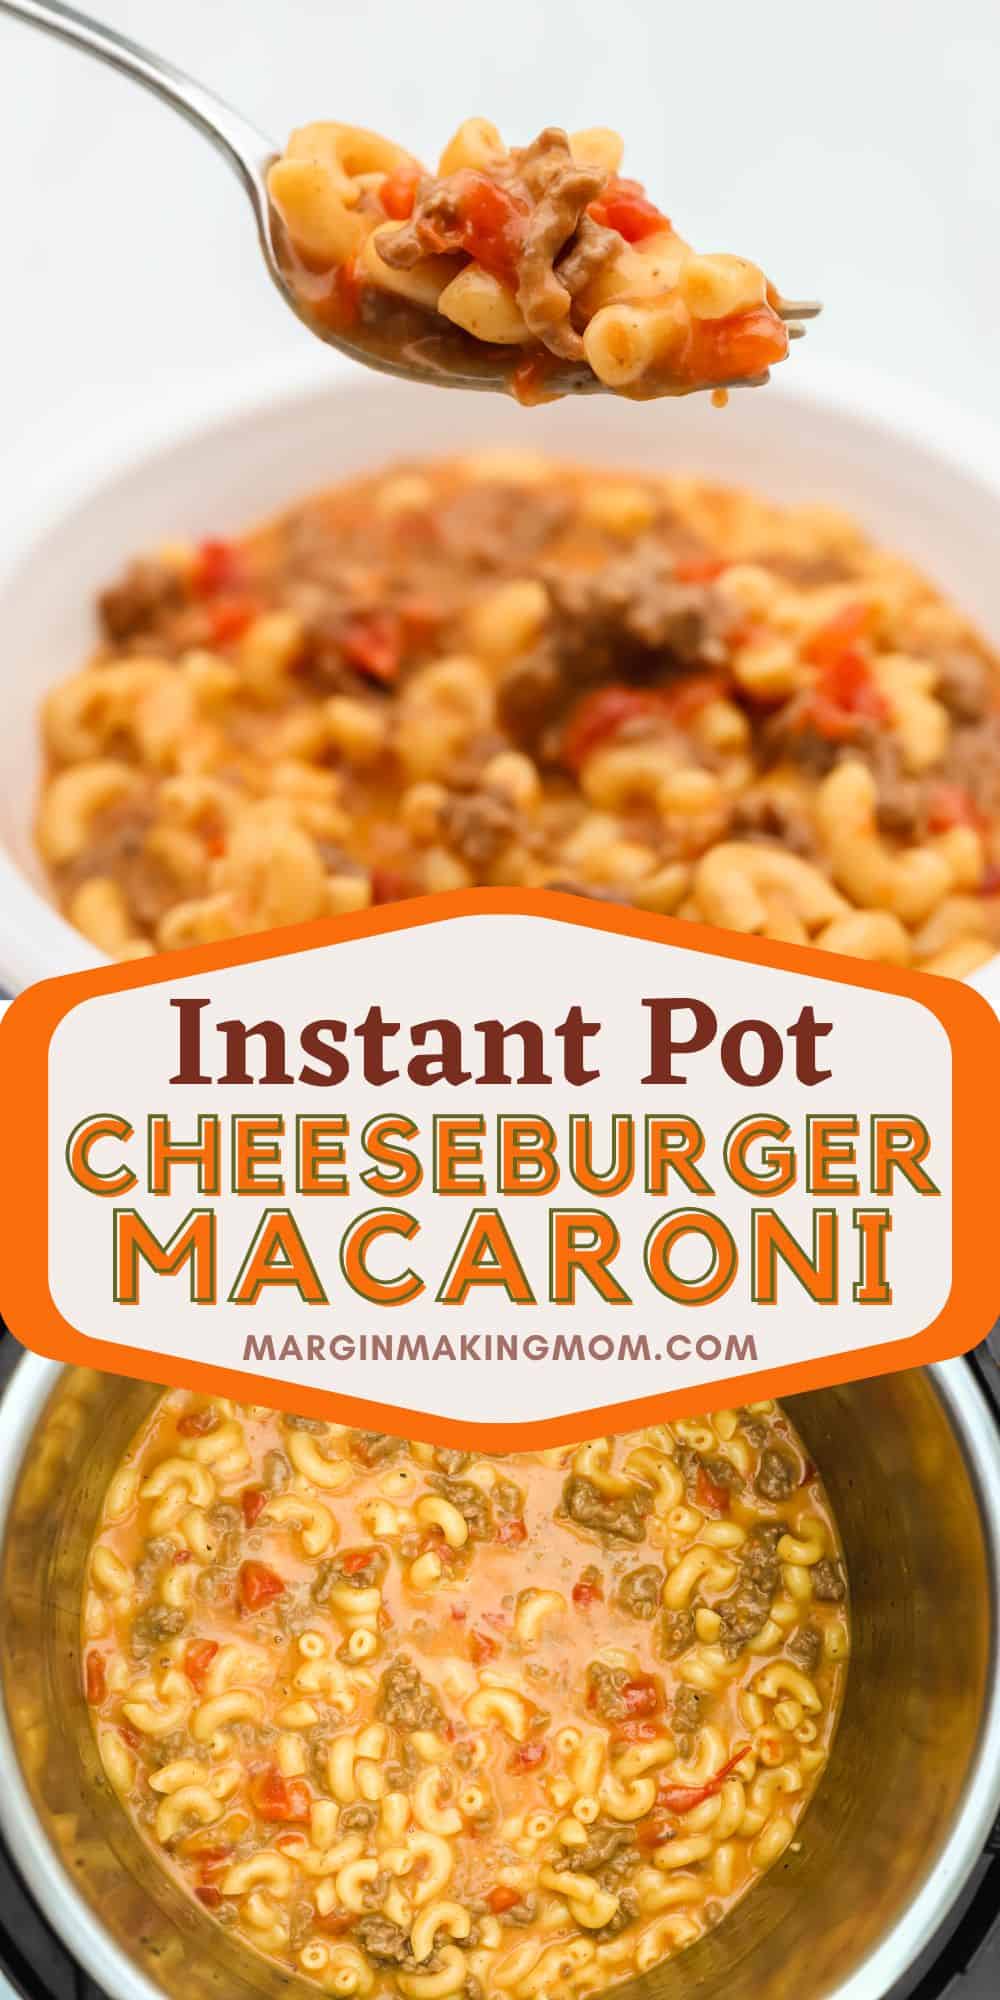 two photos showing different views of Instant Pot pressure cooker cheeseburger macaroni.